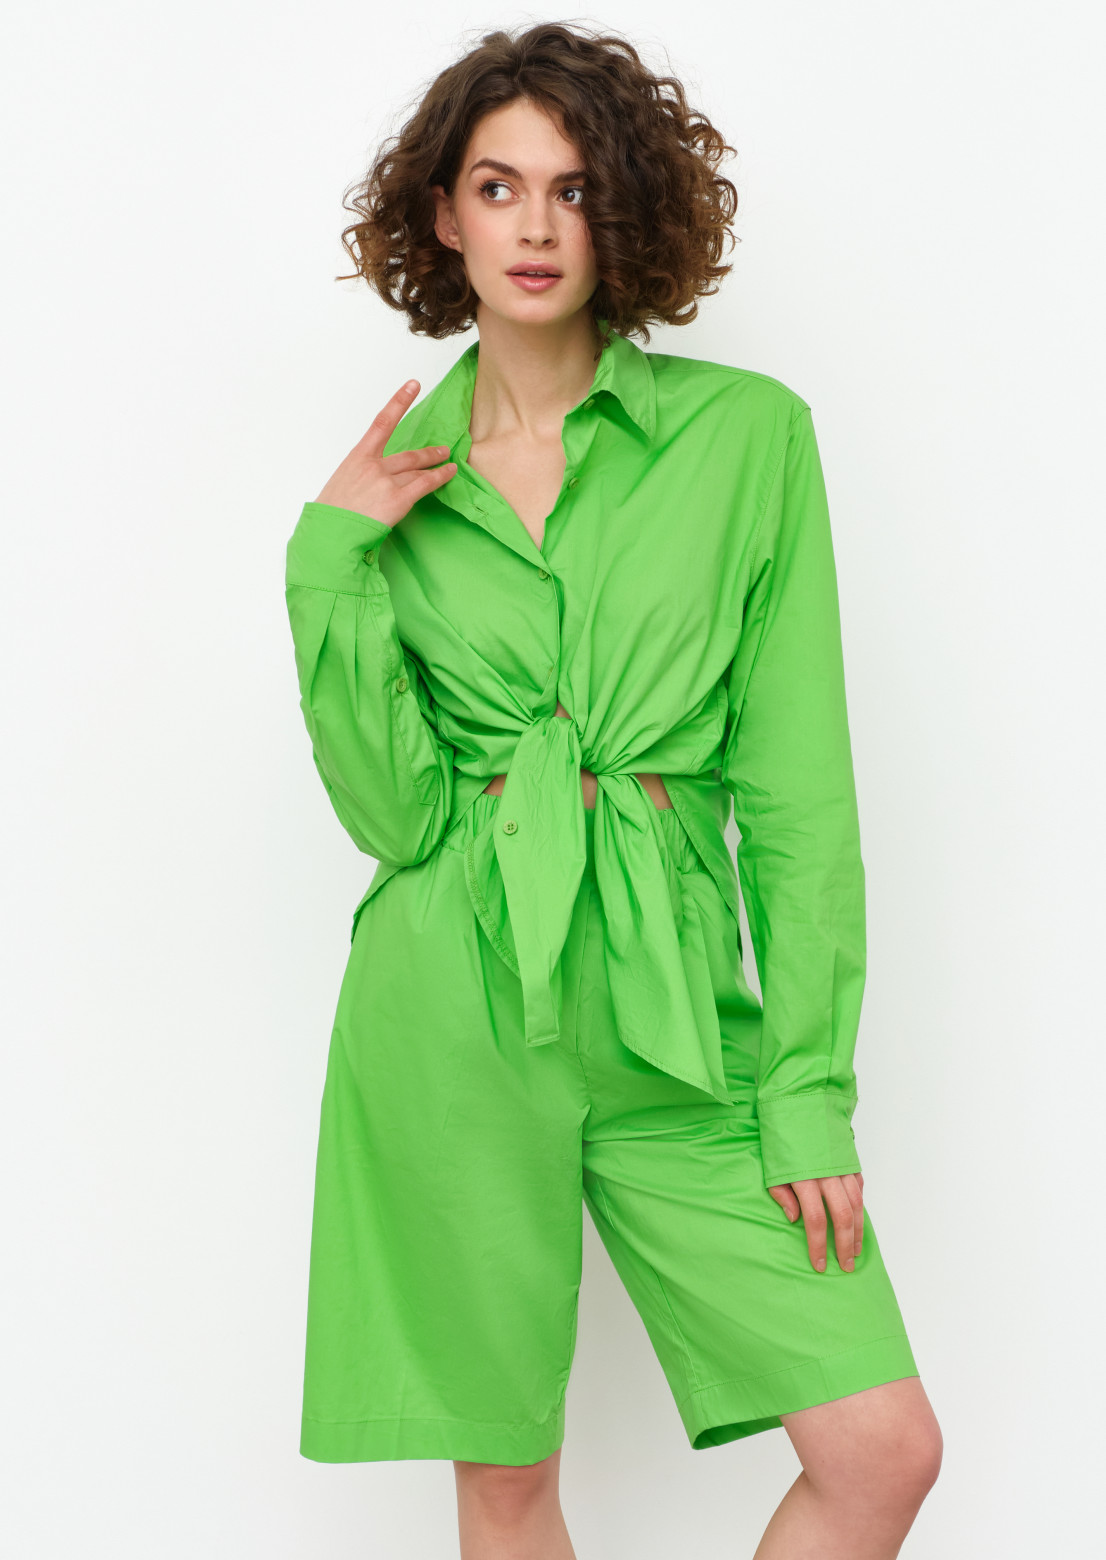 Light green colour suit with shirt and elongated shorts 